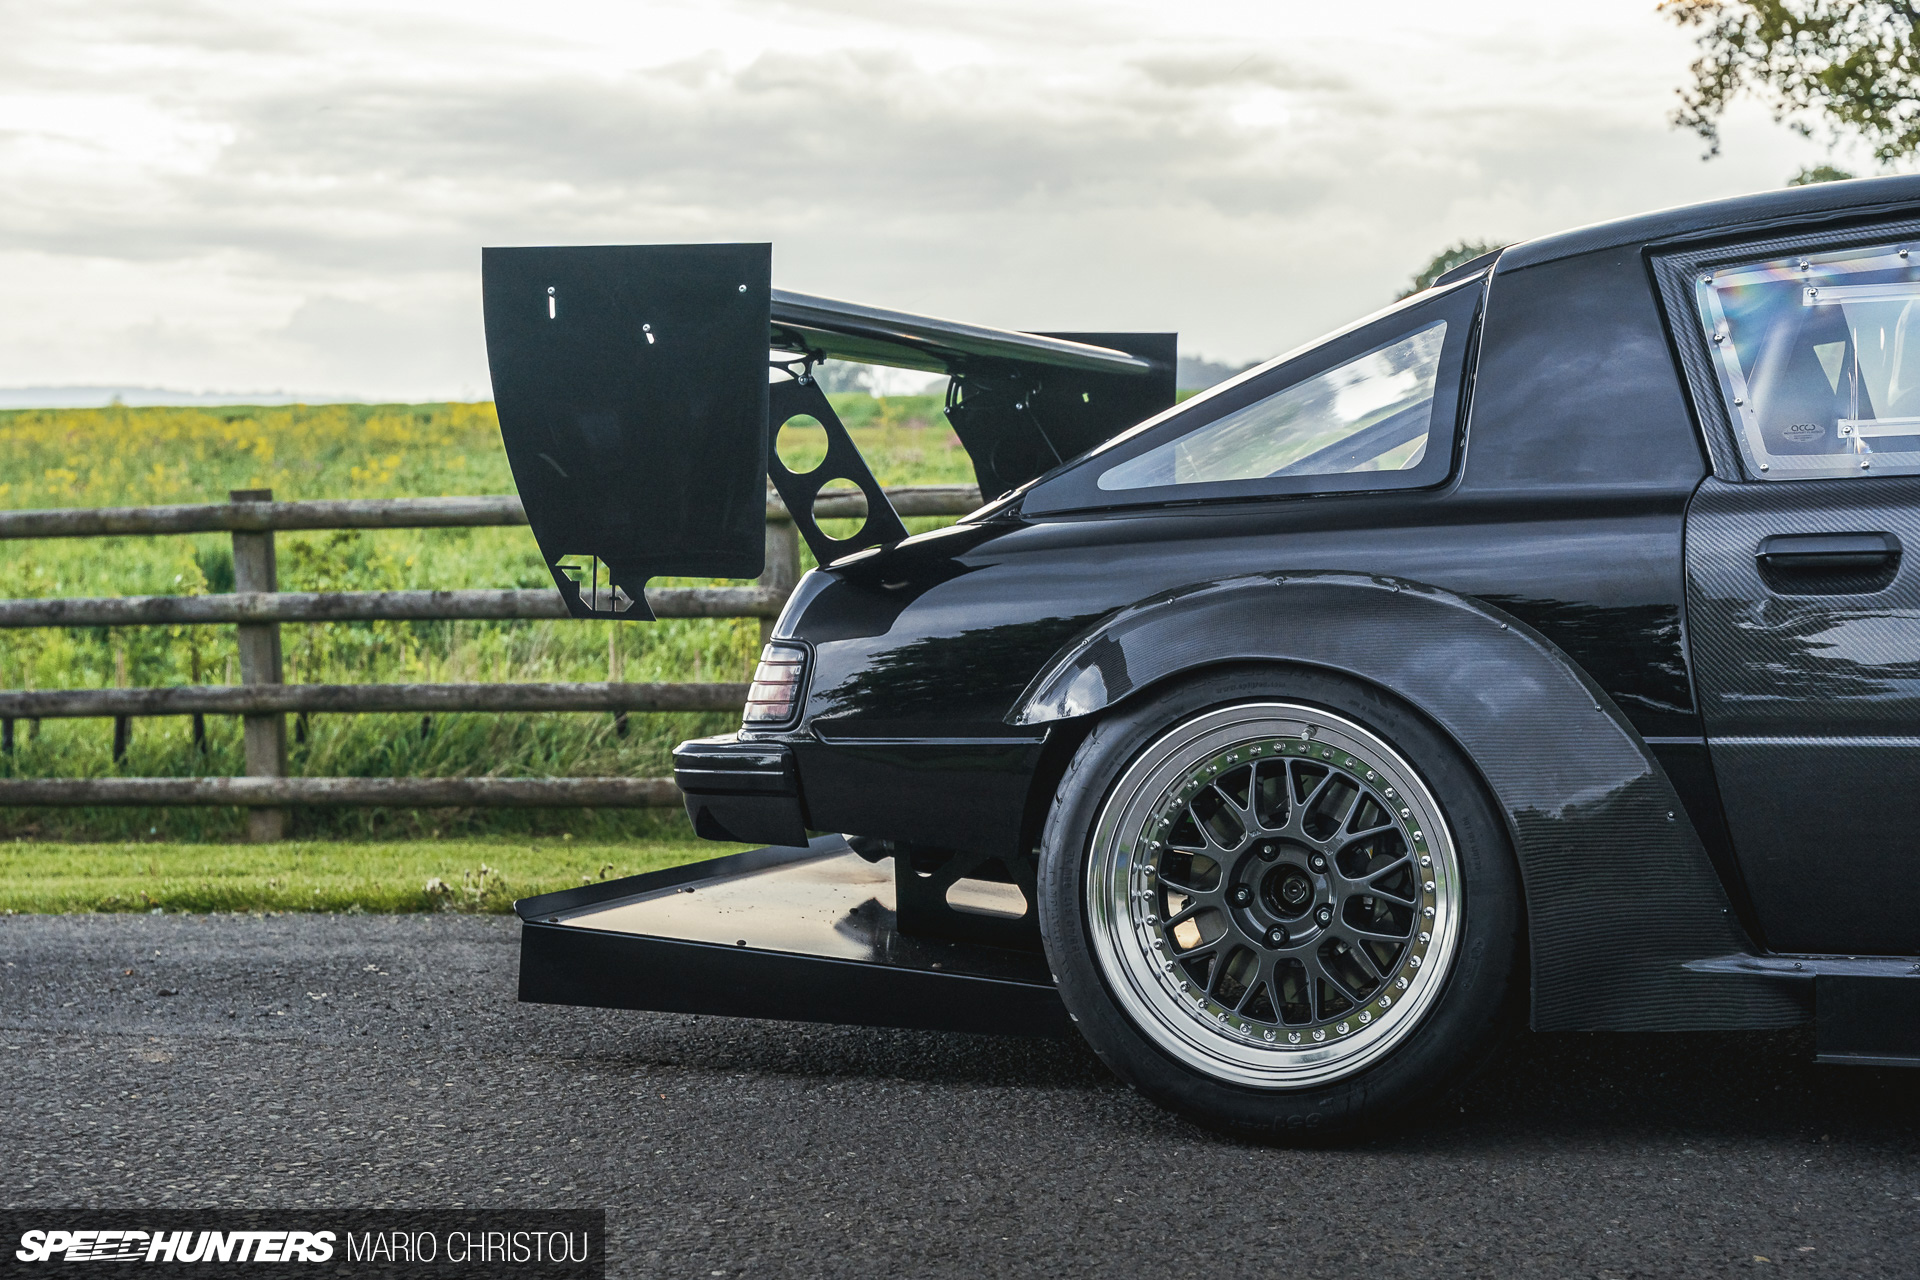 uk, time-attack, sa22c, sa22, rx7, rx-7, race car, mazda, k20a2, k20a, k20, k-swap, honda, built from the ground up: a time-attacking k20 turbo rx-7